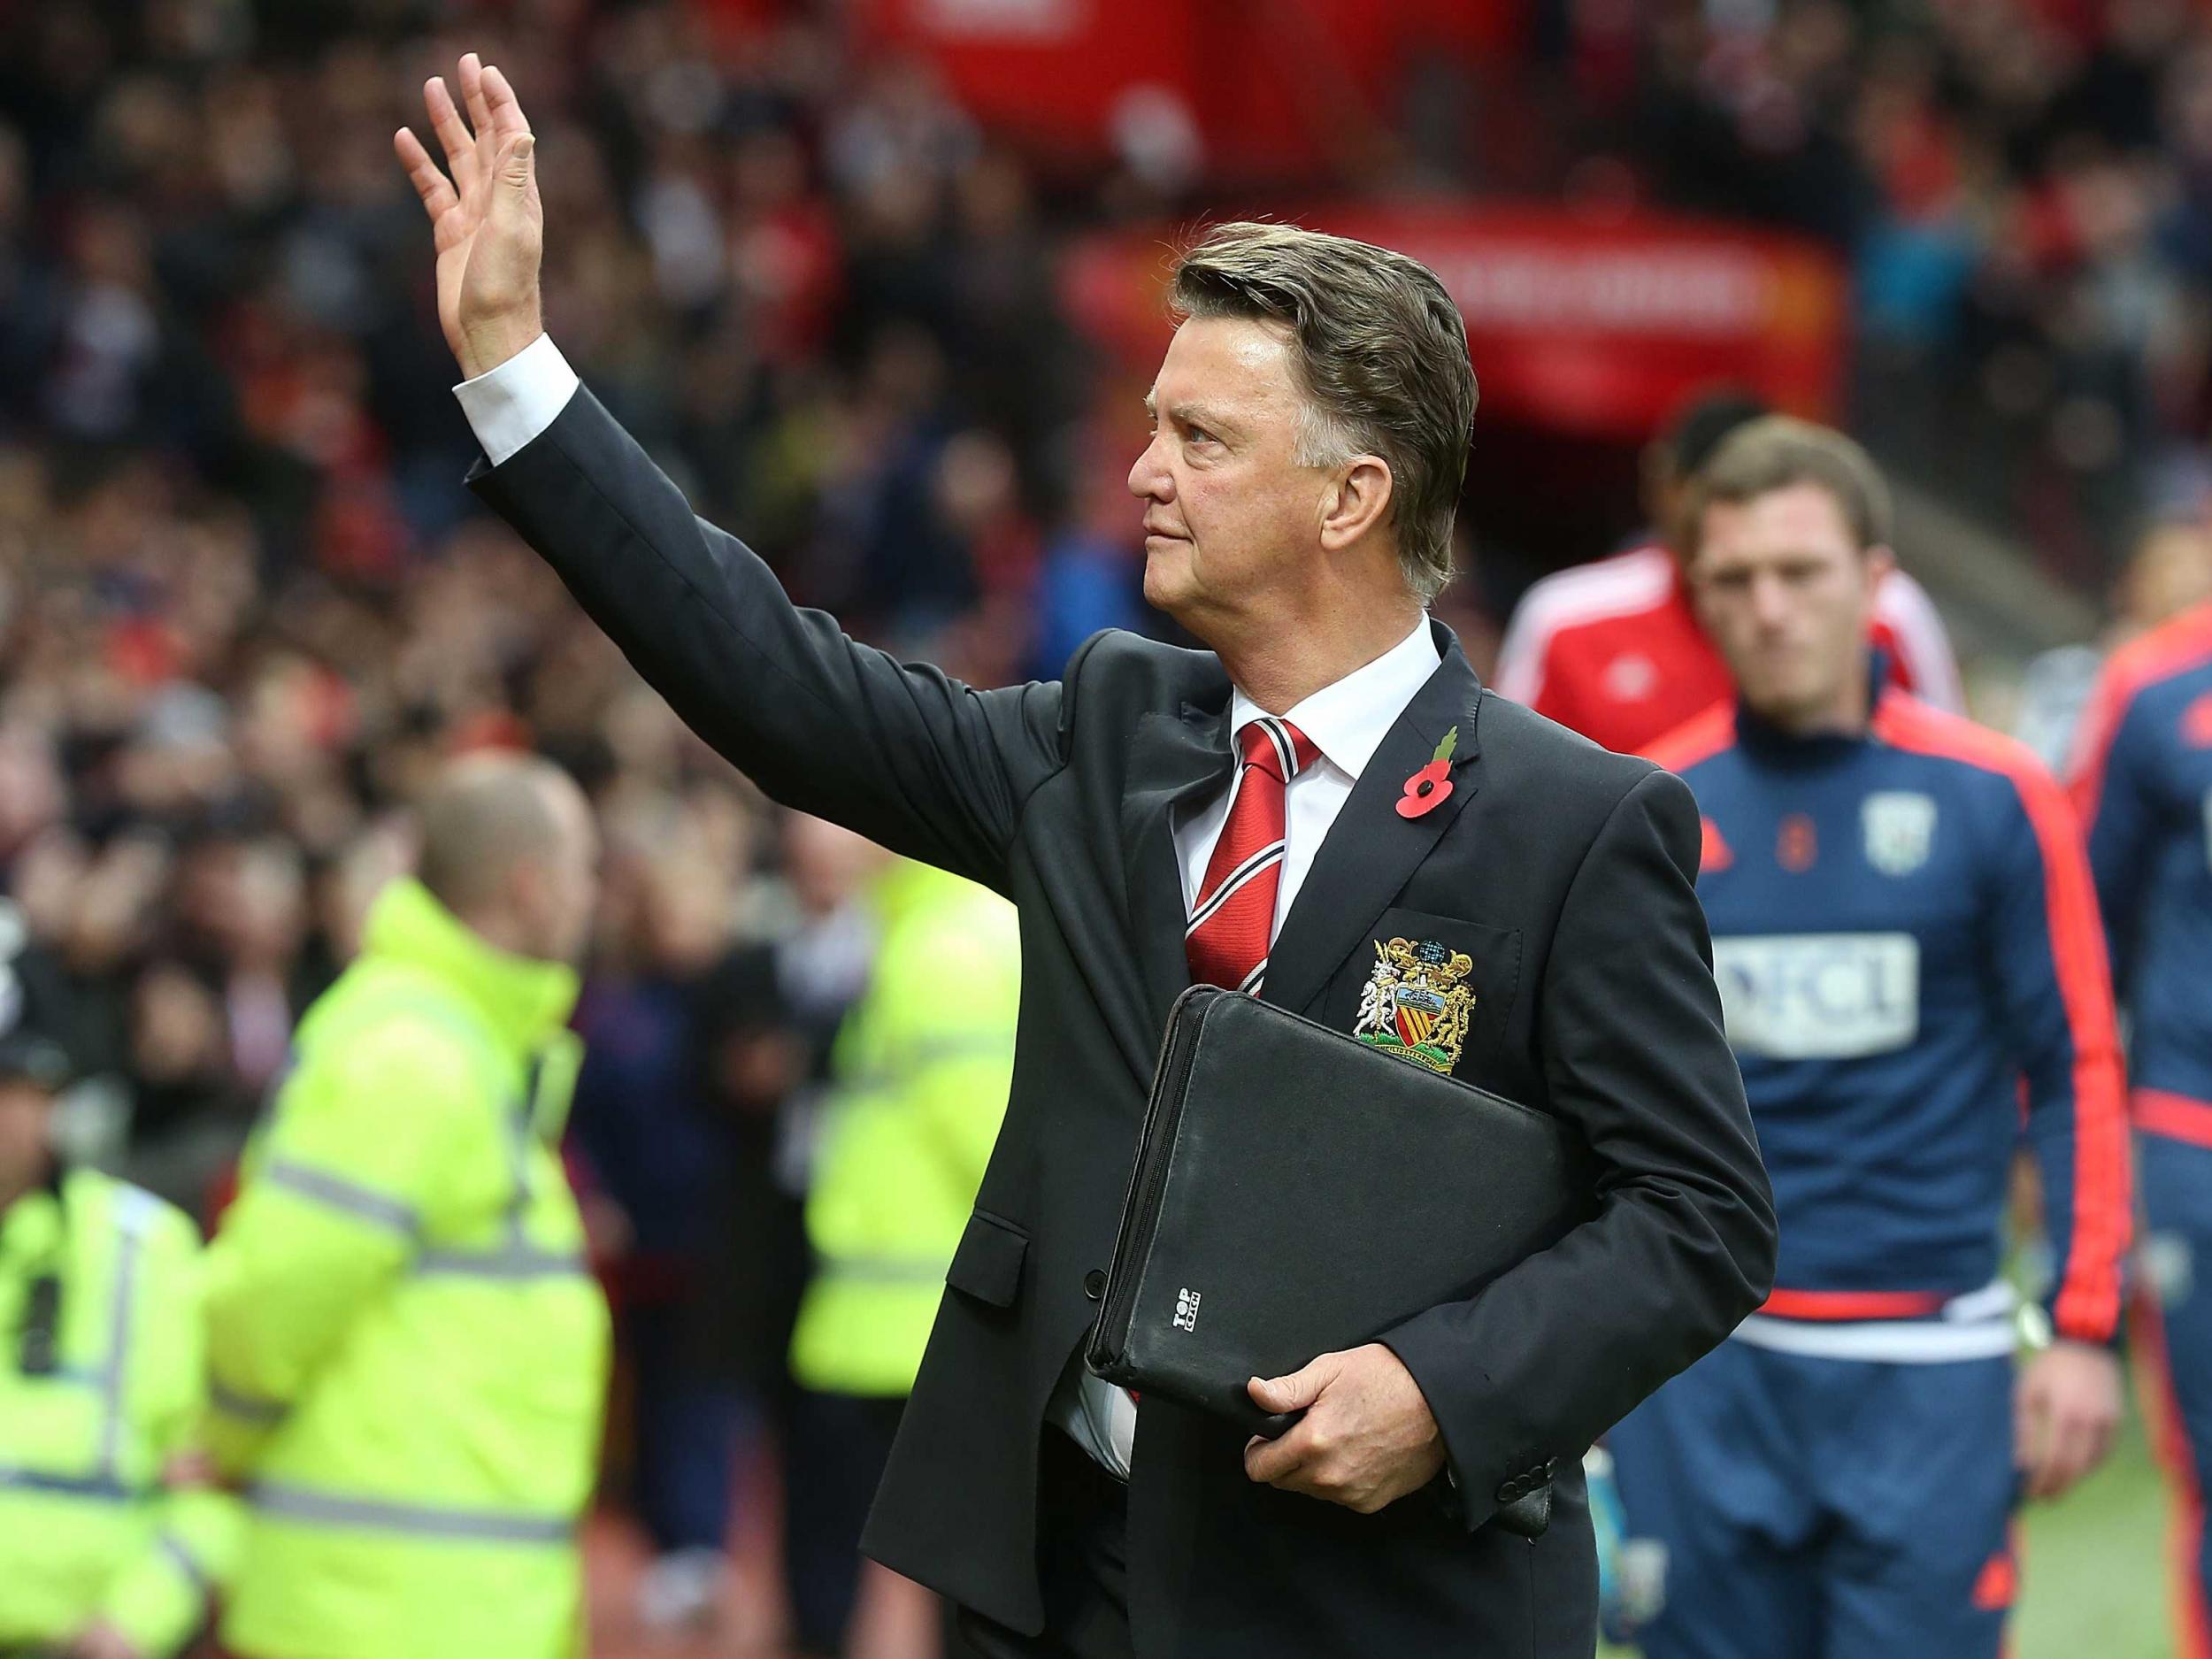 The question is whether Van Gaal will look down on Manchester’s Albert Square holding up the Premier League trophy